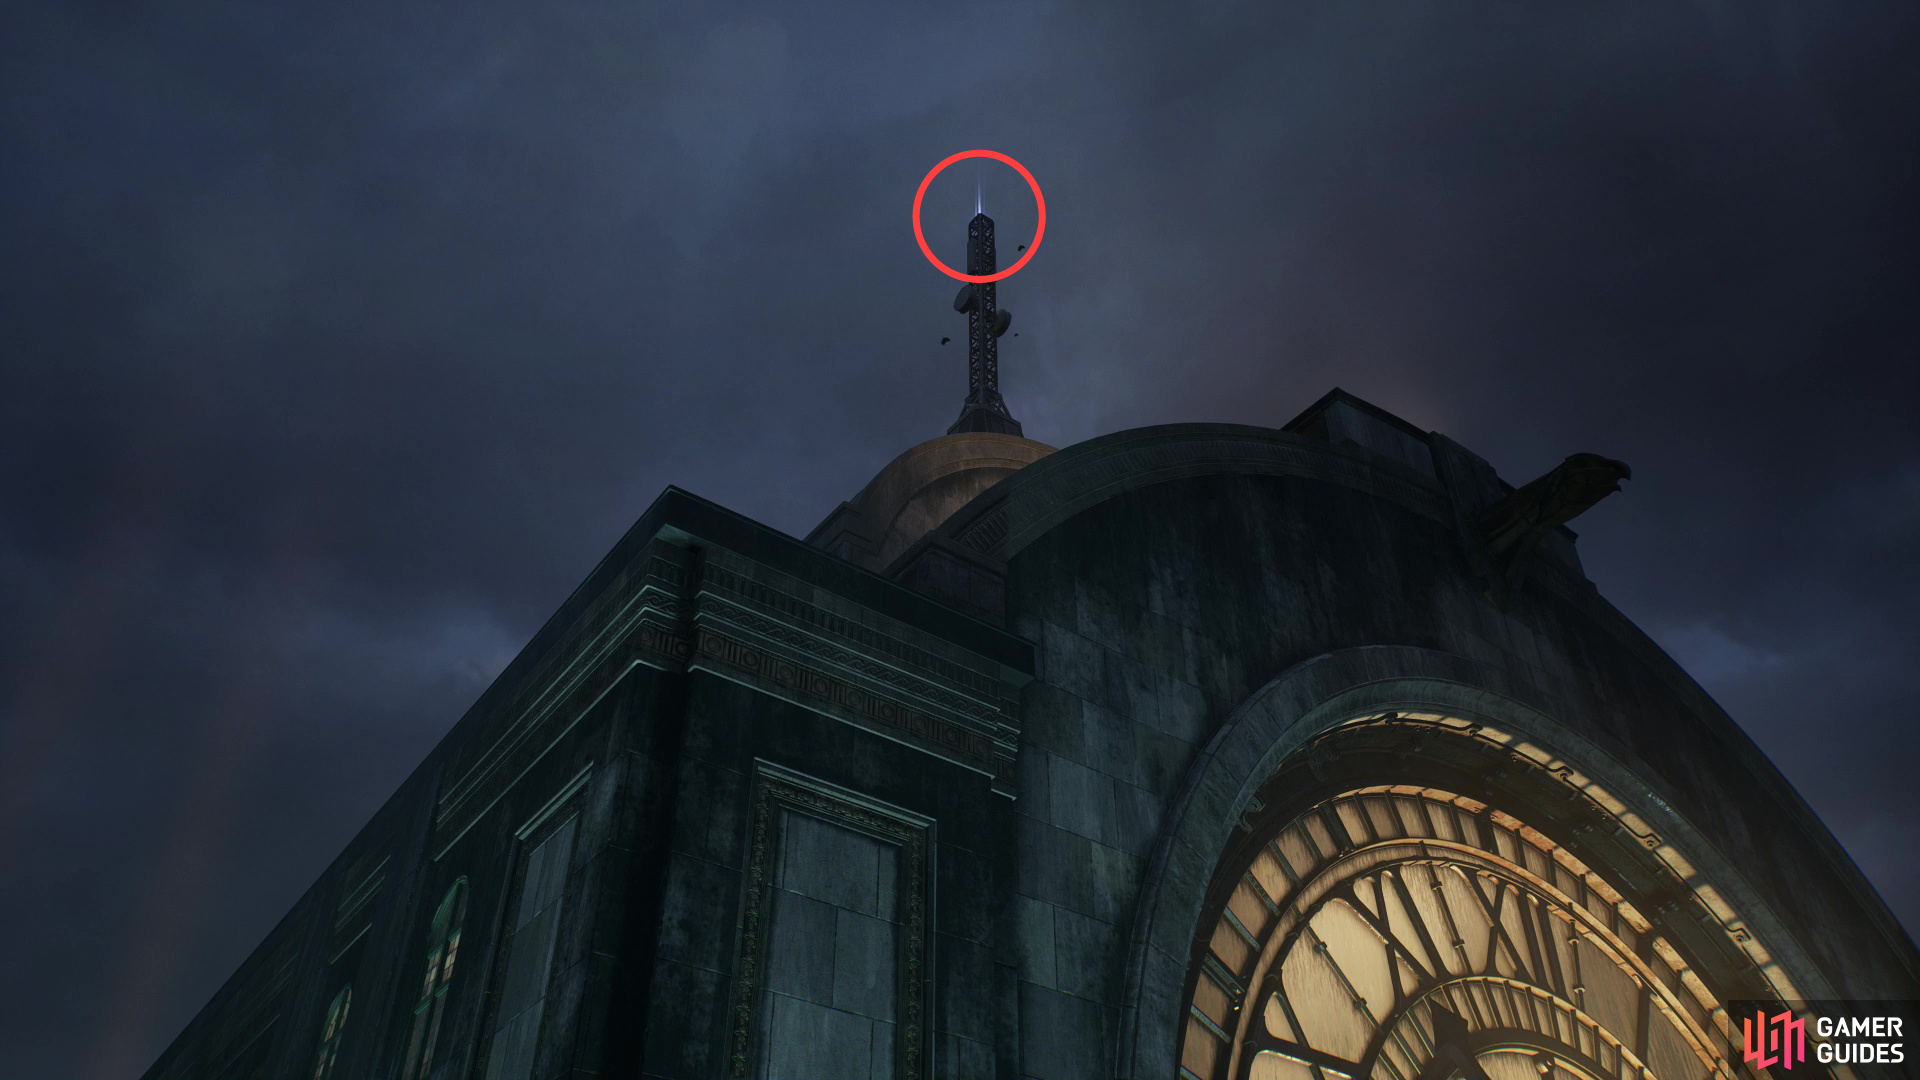 Home sweet home, you'll find a Batarang atop the Union Station Belfry.